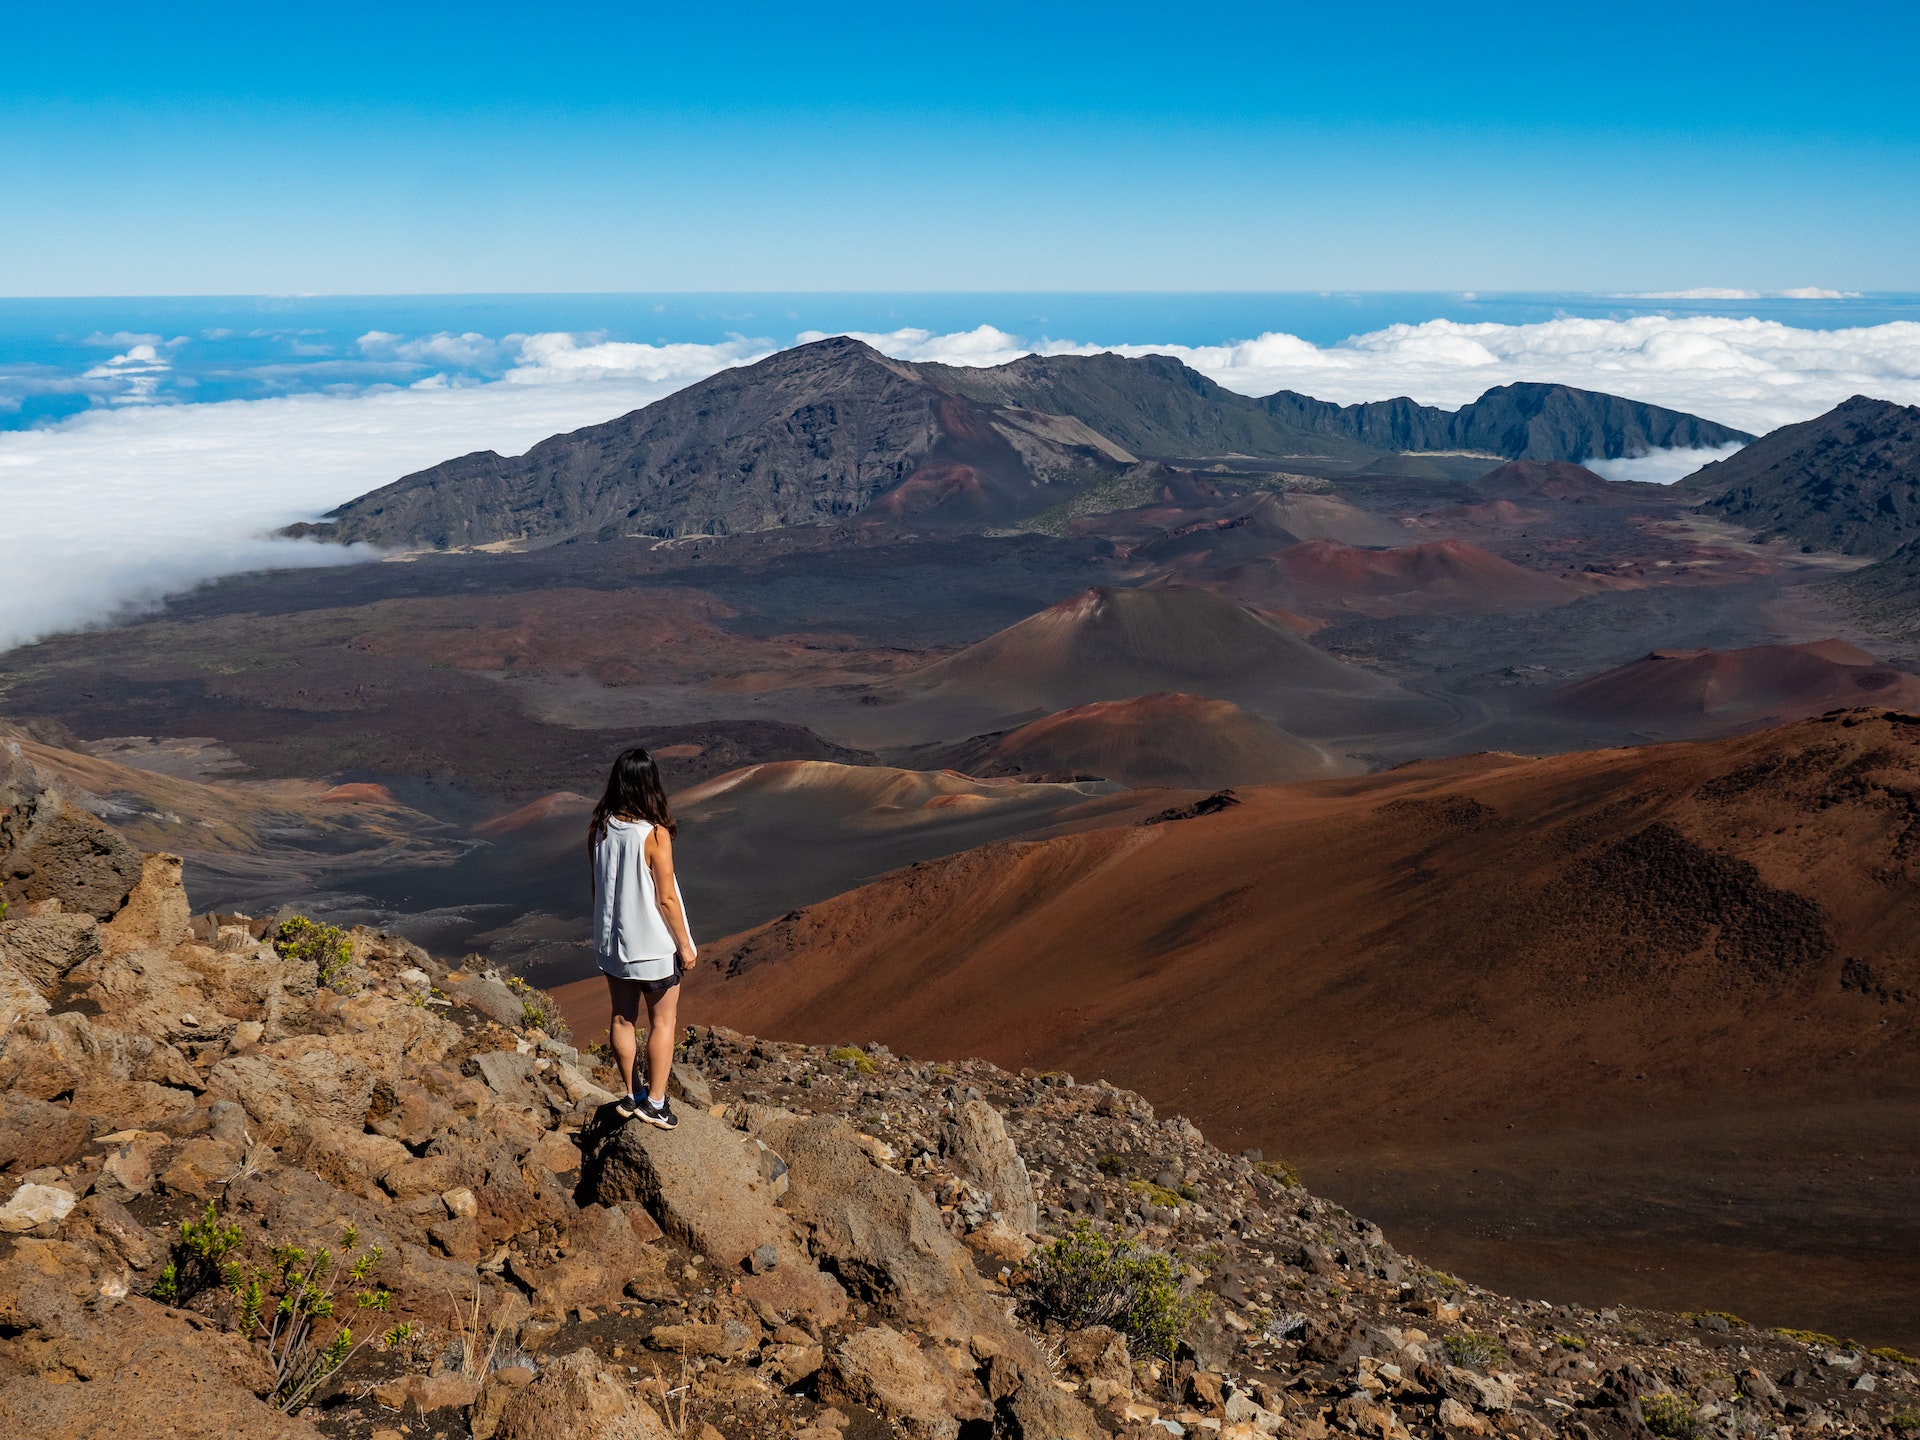 Best Time To Visit Maui - When To Go?